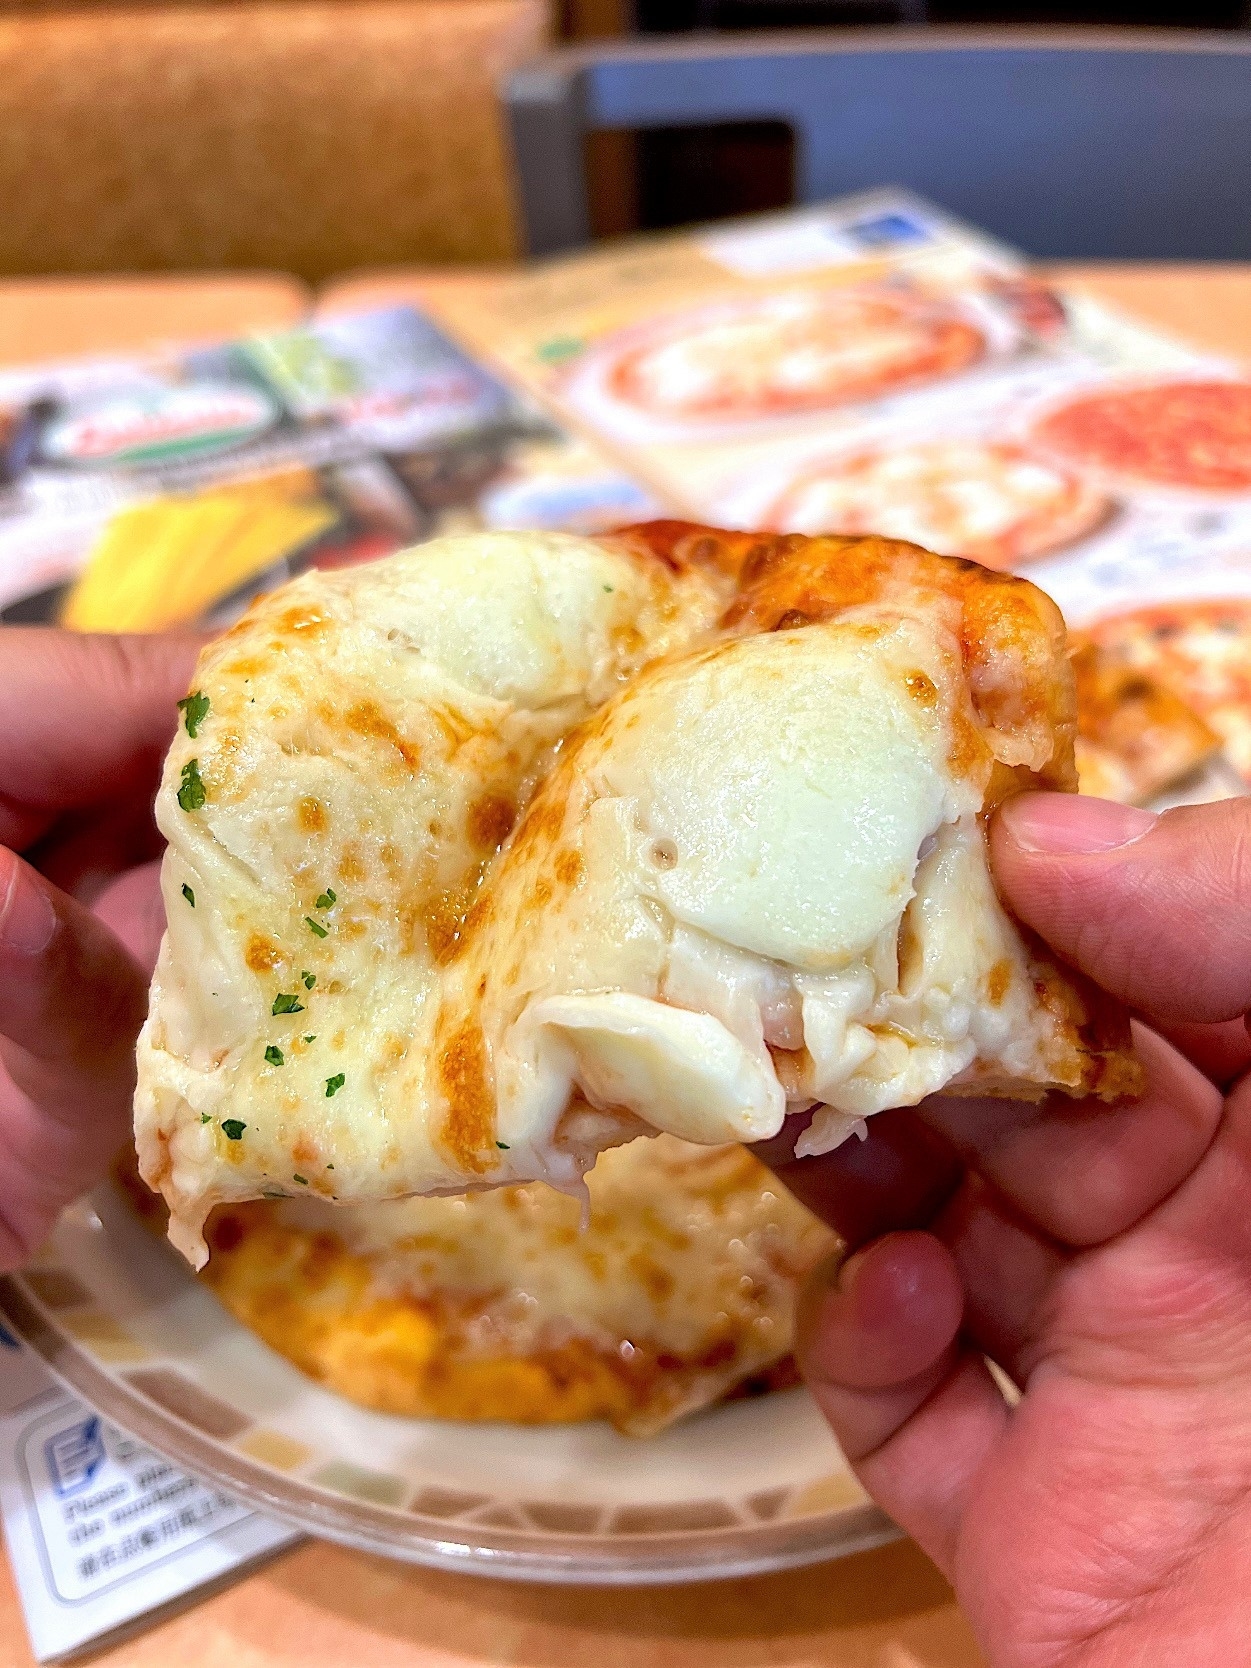 Person holding a slice of cheese pizza with visible stretchy cheese